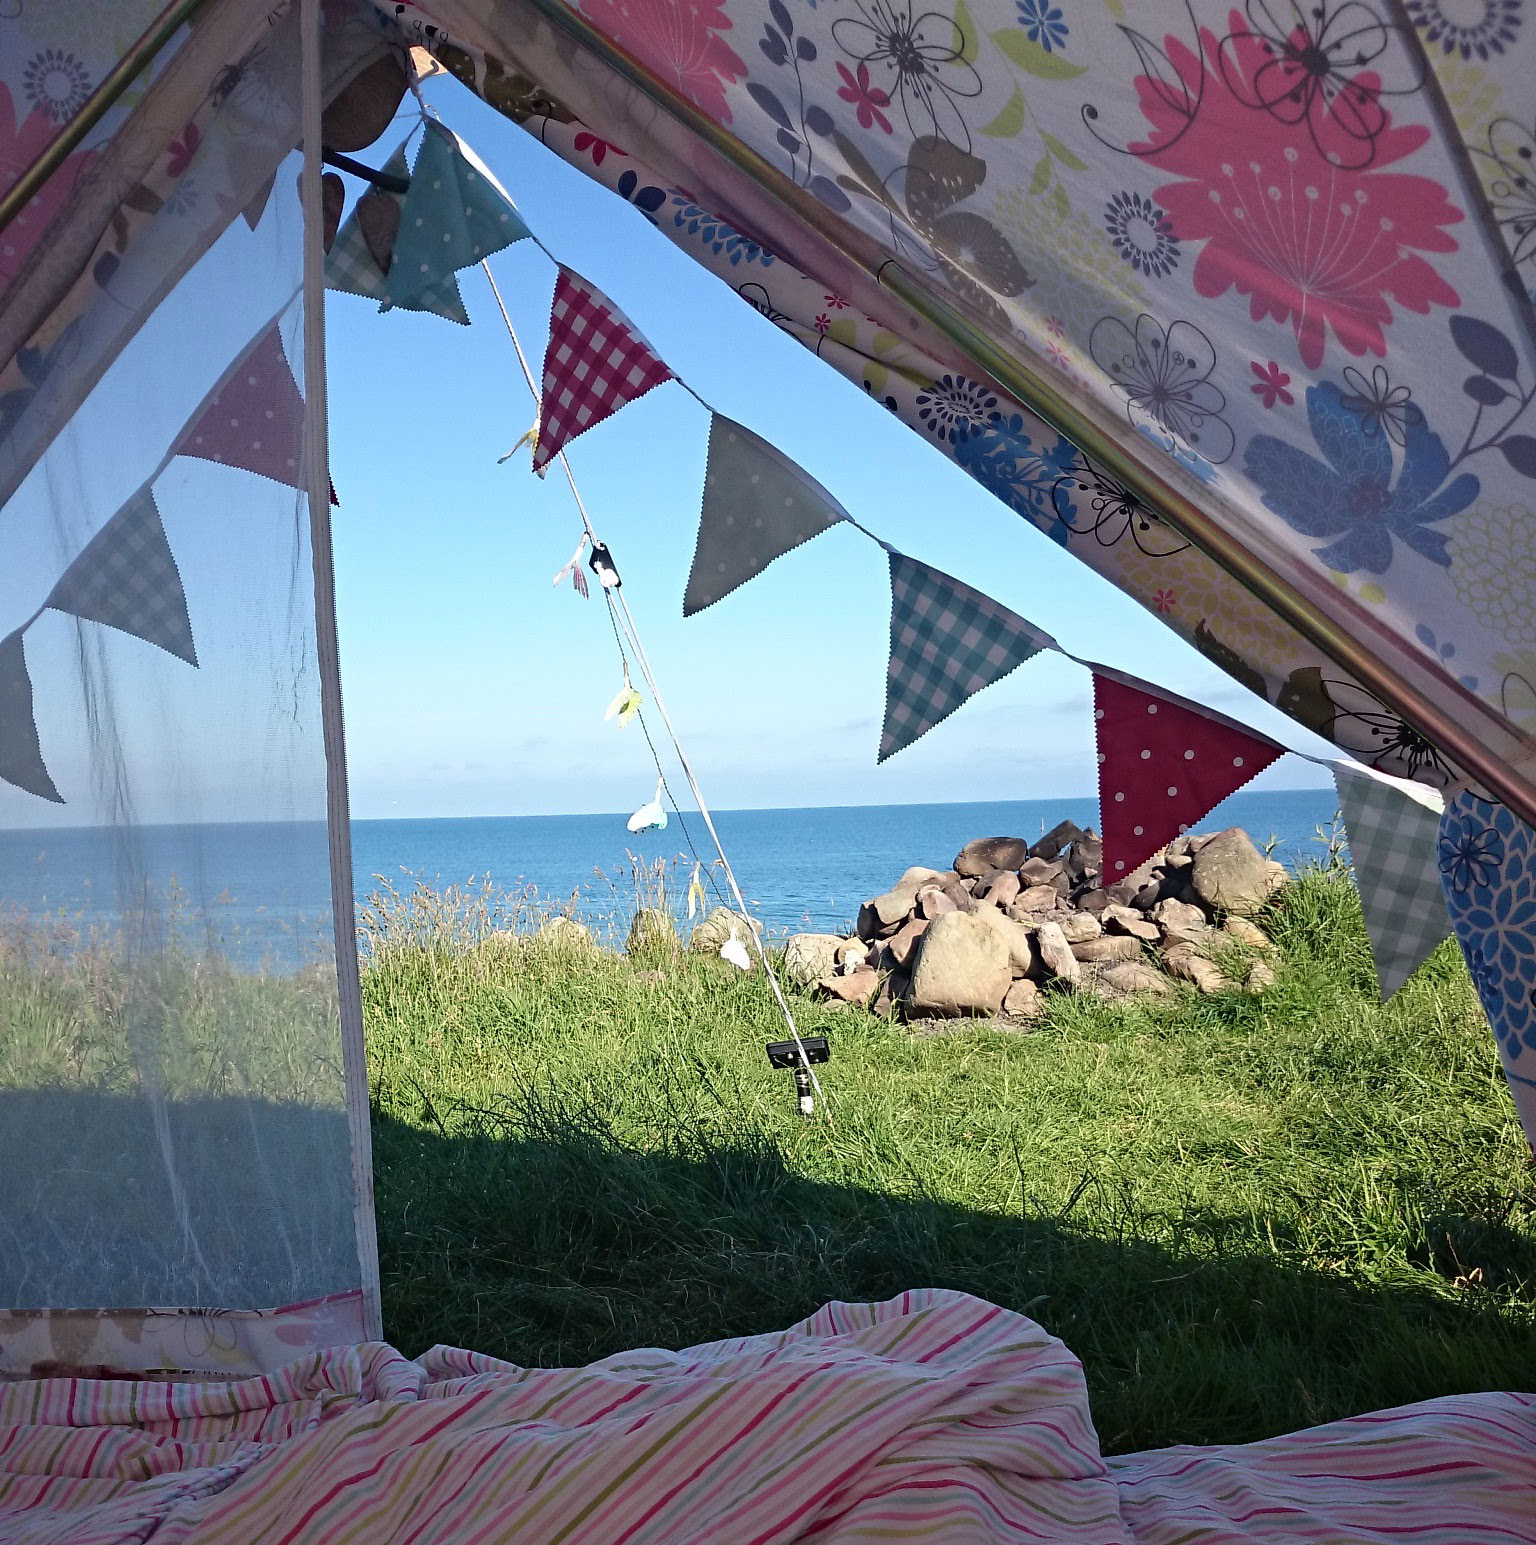 The view from my tent at Cae Du Farm campsite